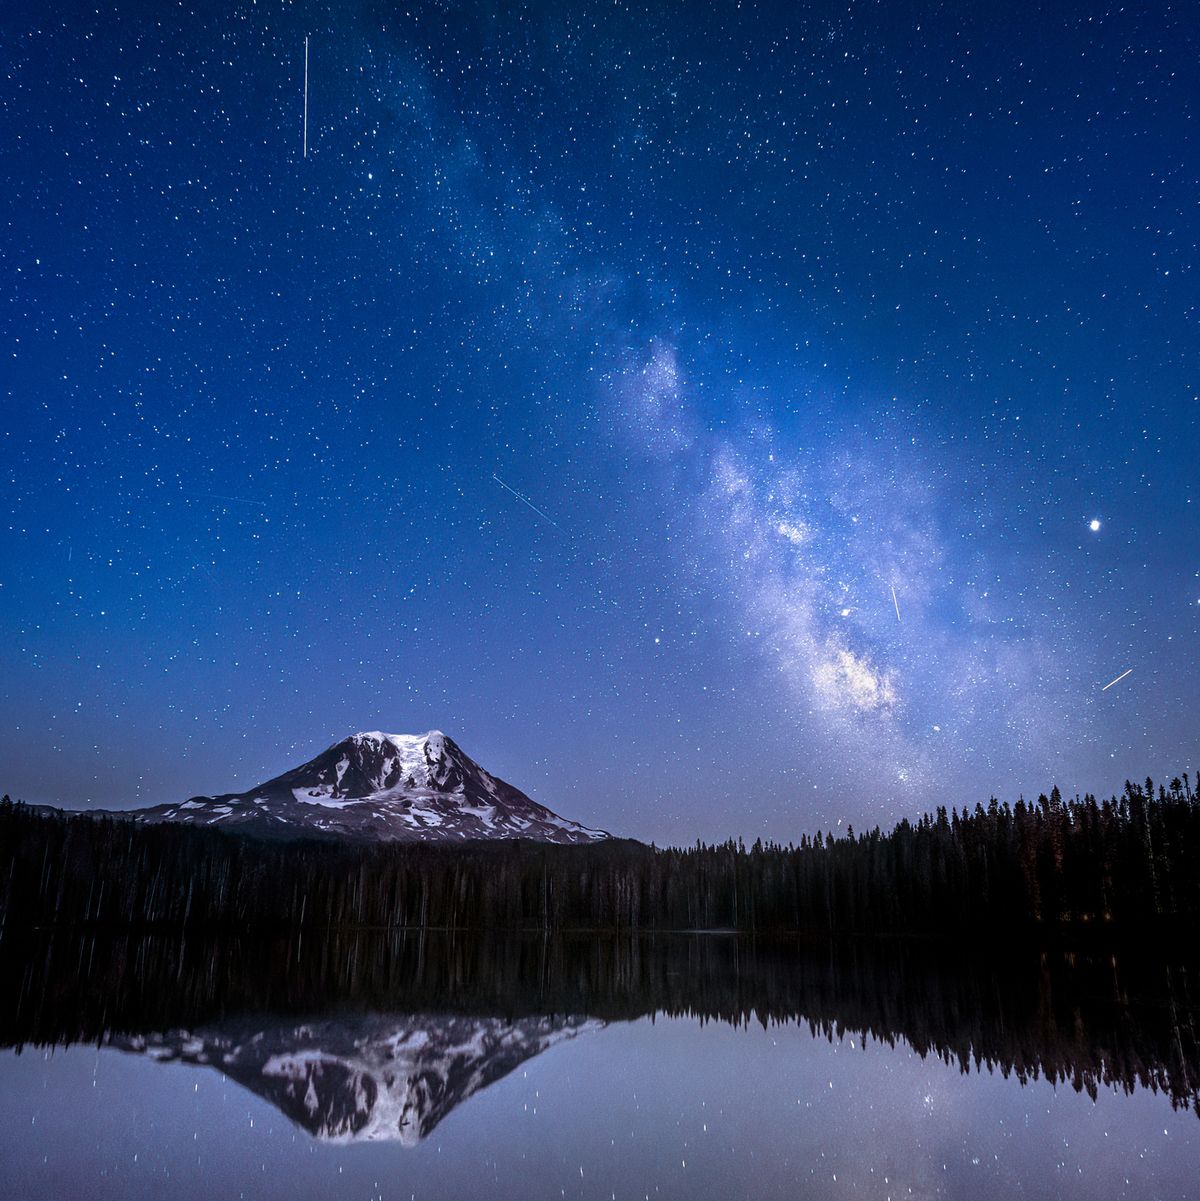 the delta aquariids meteor shower and milky way over mt adams at lake takhlakh, washington state